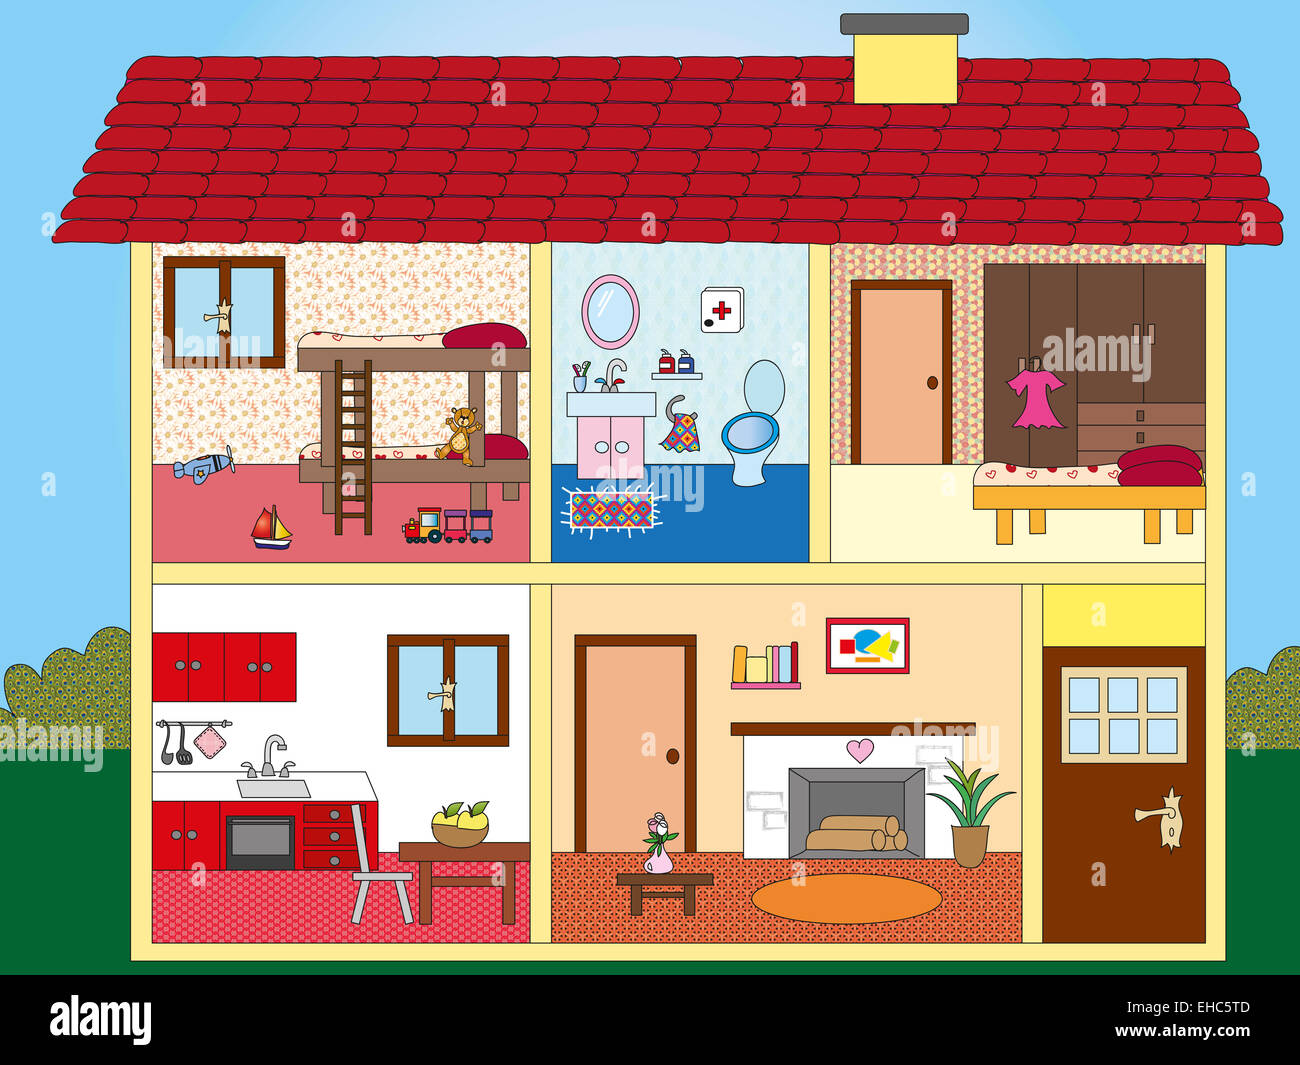 2 around the house. House комната cartoon. Rooms in the House. Картинки my House for Kids. House Rooms names for Kids.